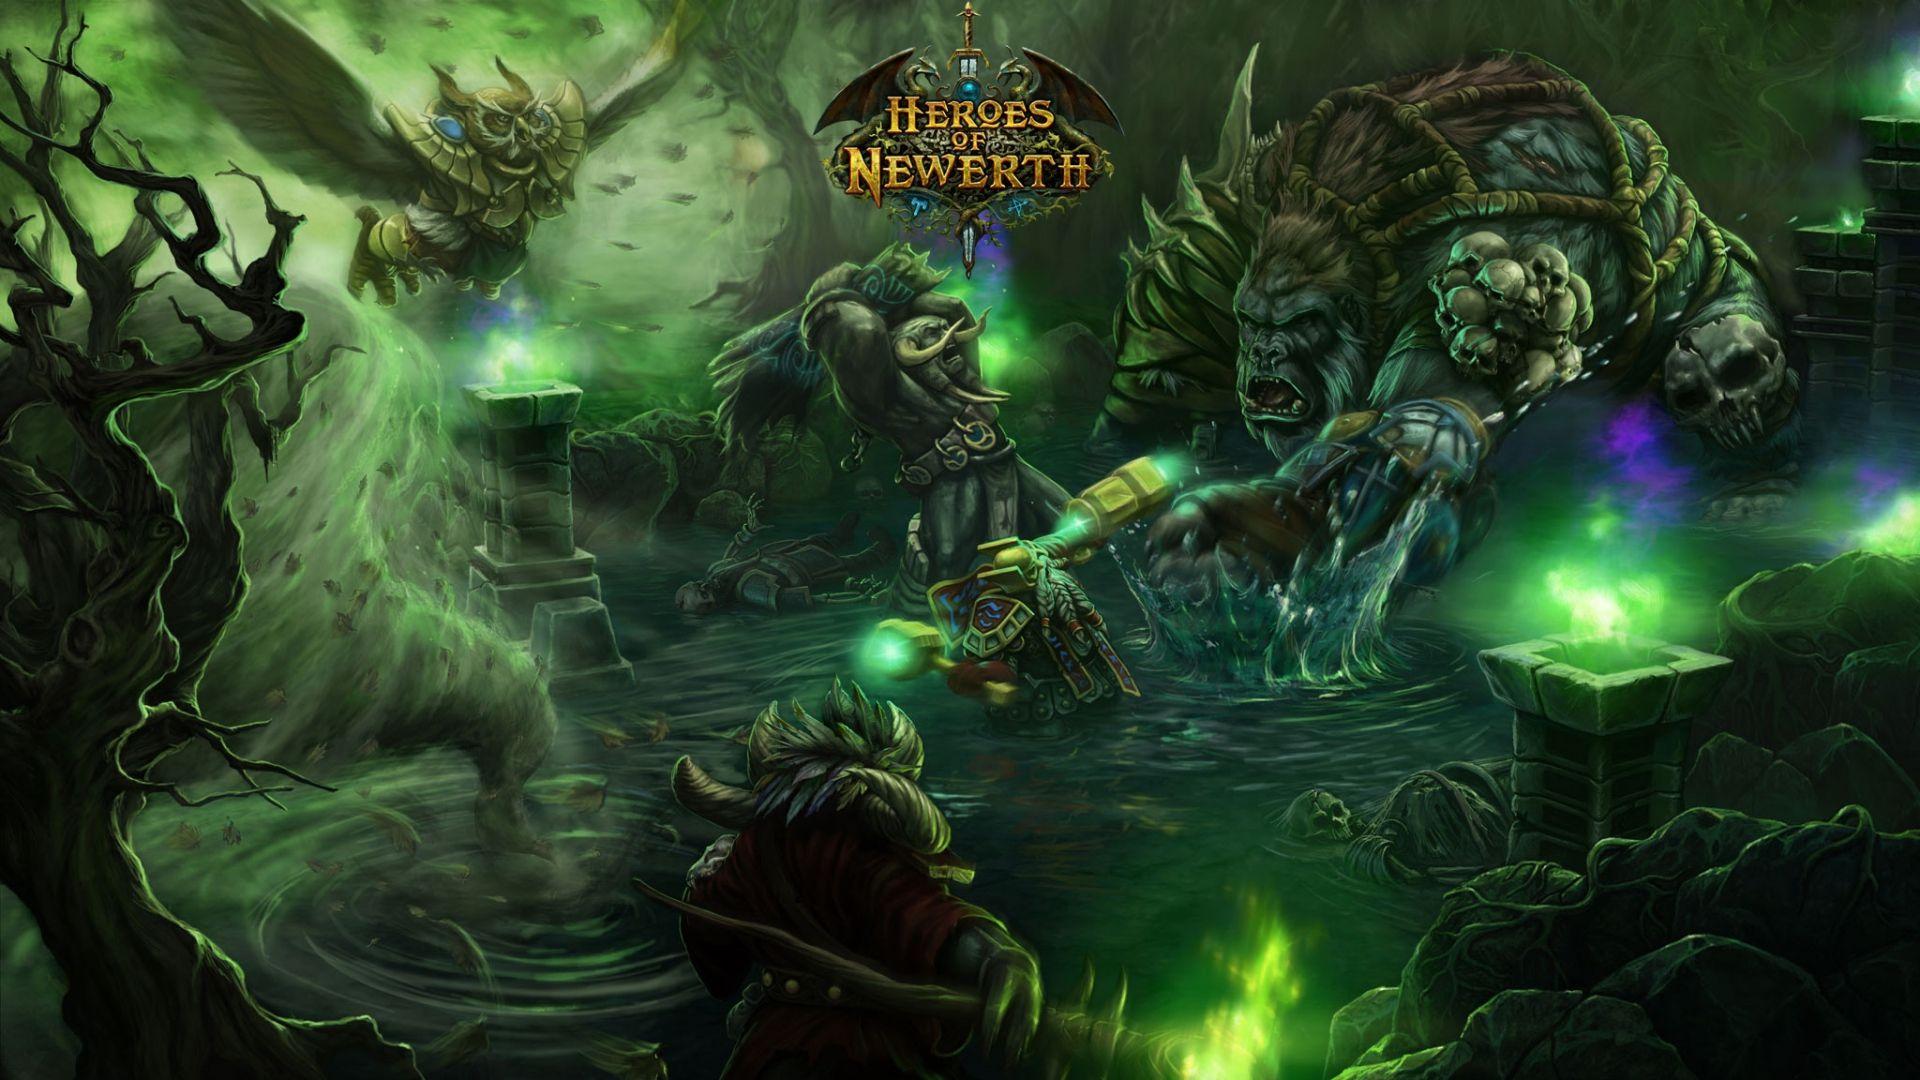 world of warcraft wallpapers 1920x1080